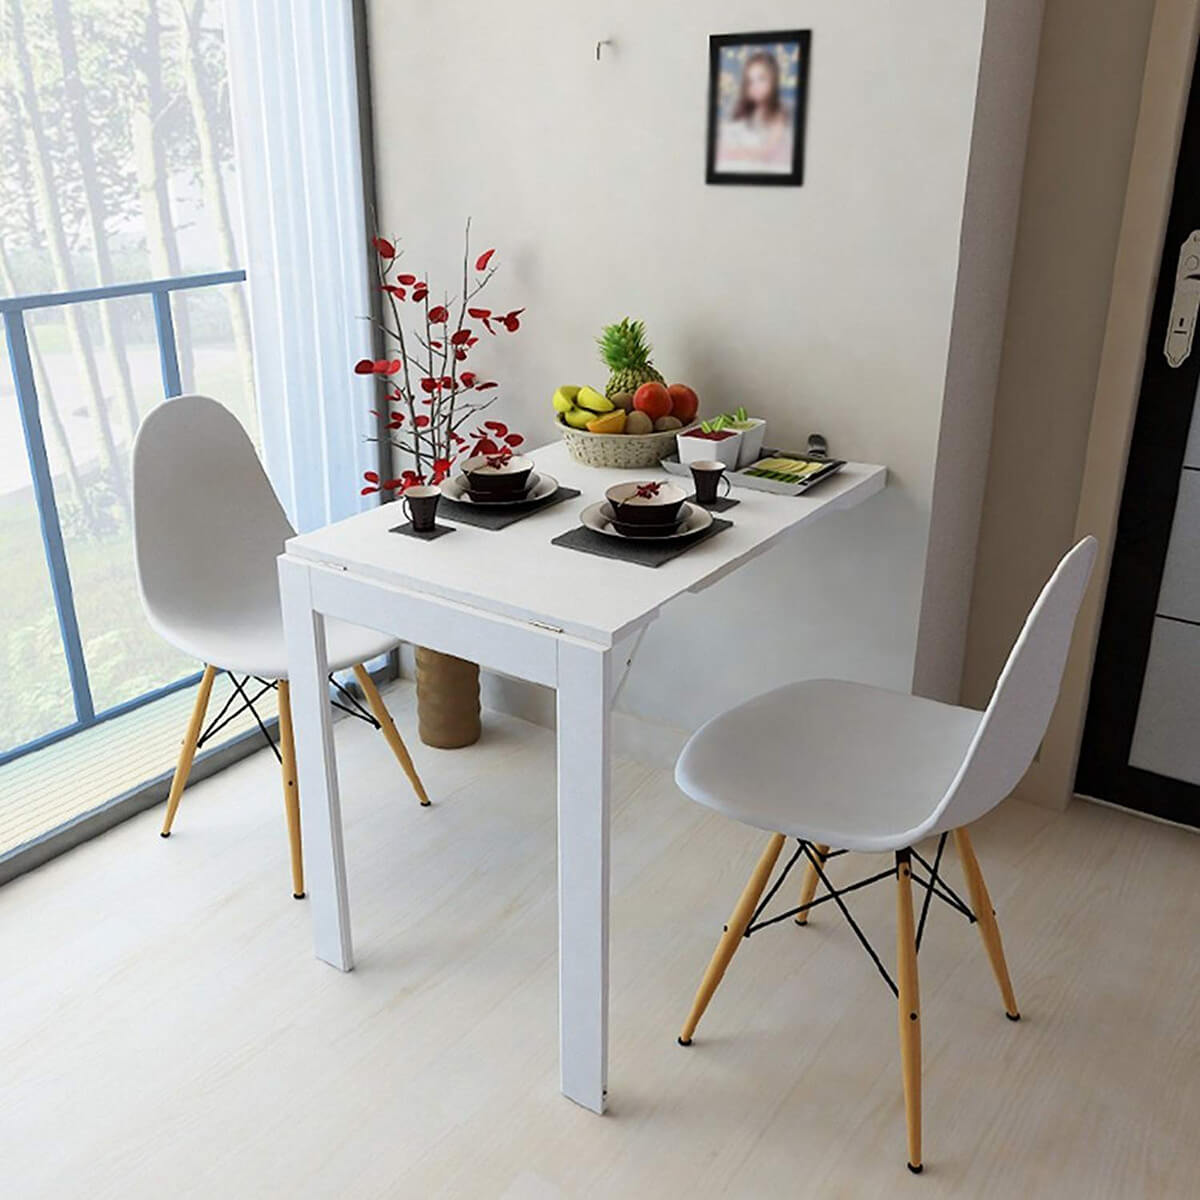 Double Sided Folding Wall Table